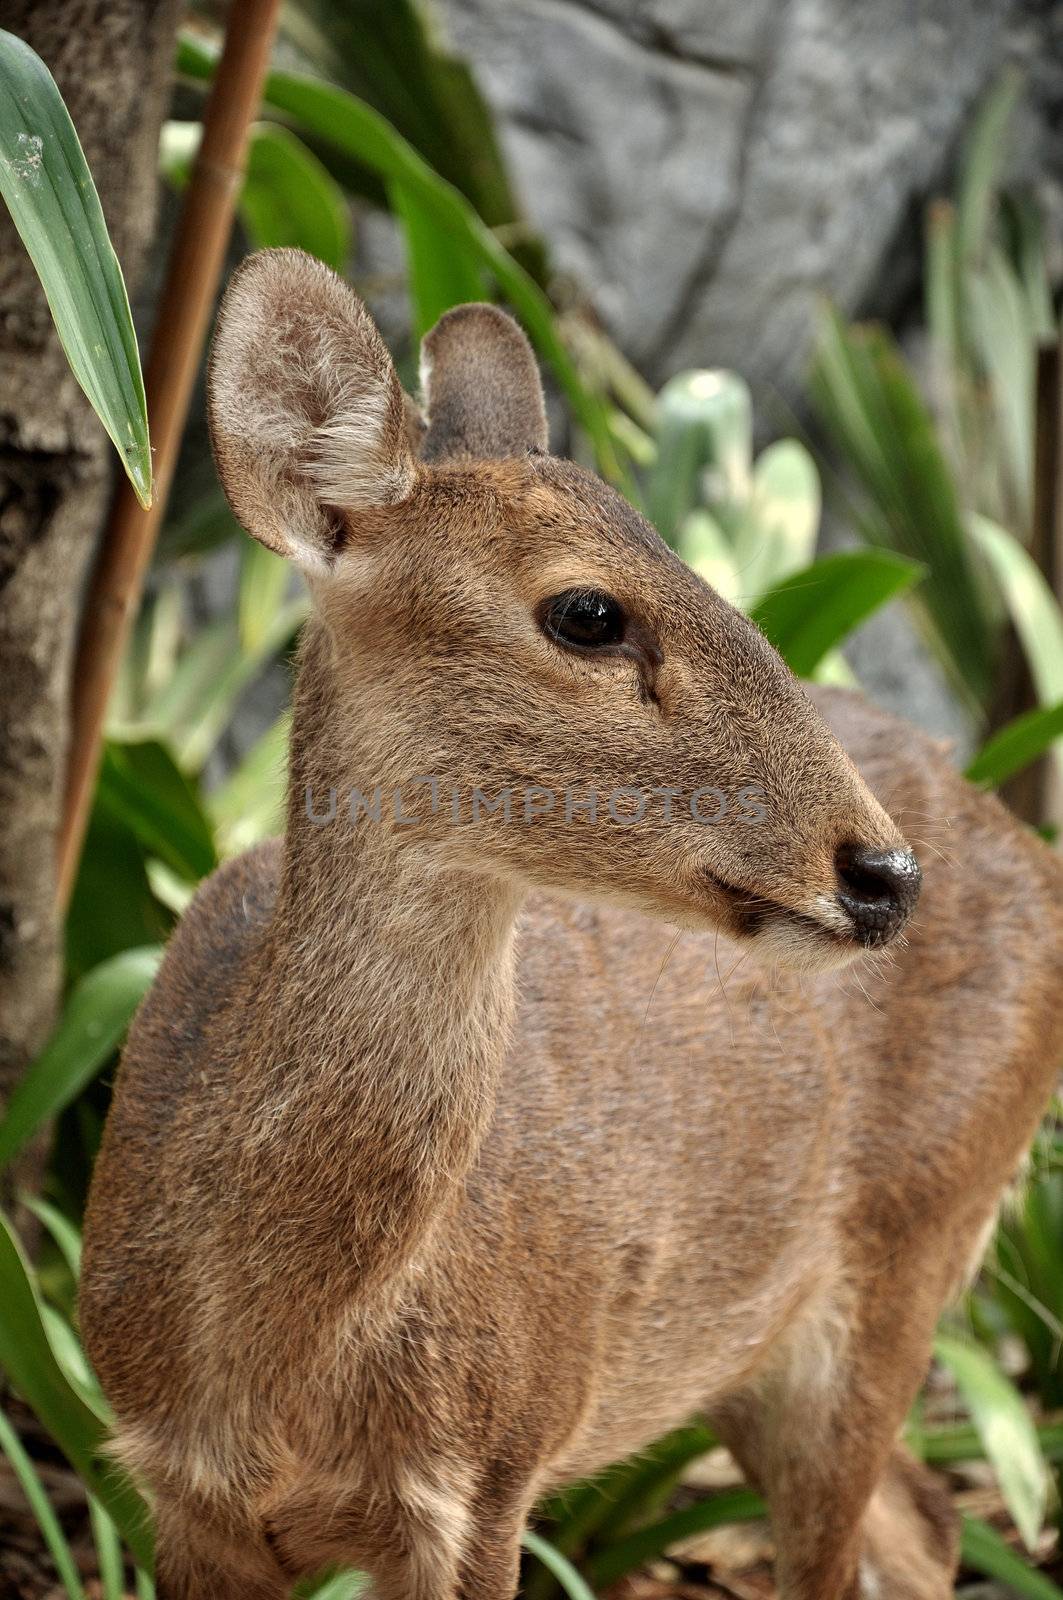 The Hog Deer is a small deer whose habitat ranges from Pakistan, through northern India, to mainland southeast Asia.